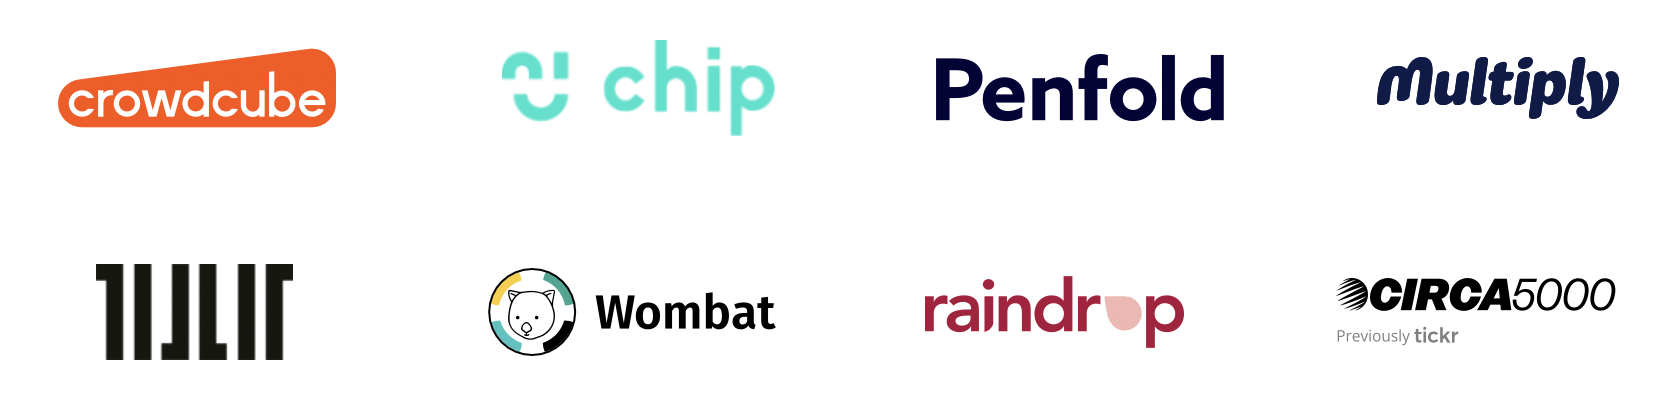 Crowdcube, Chip, Penfold, Multiply, Tillit, Wombat, Raindrop and CIRCA5000 logos